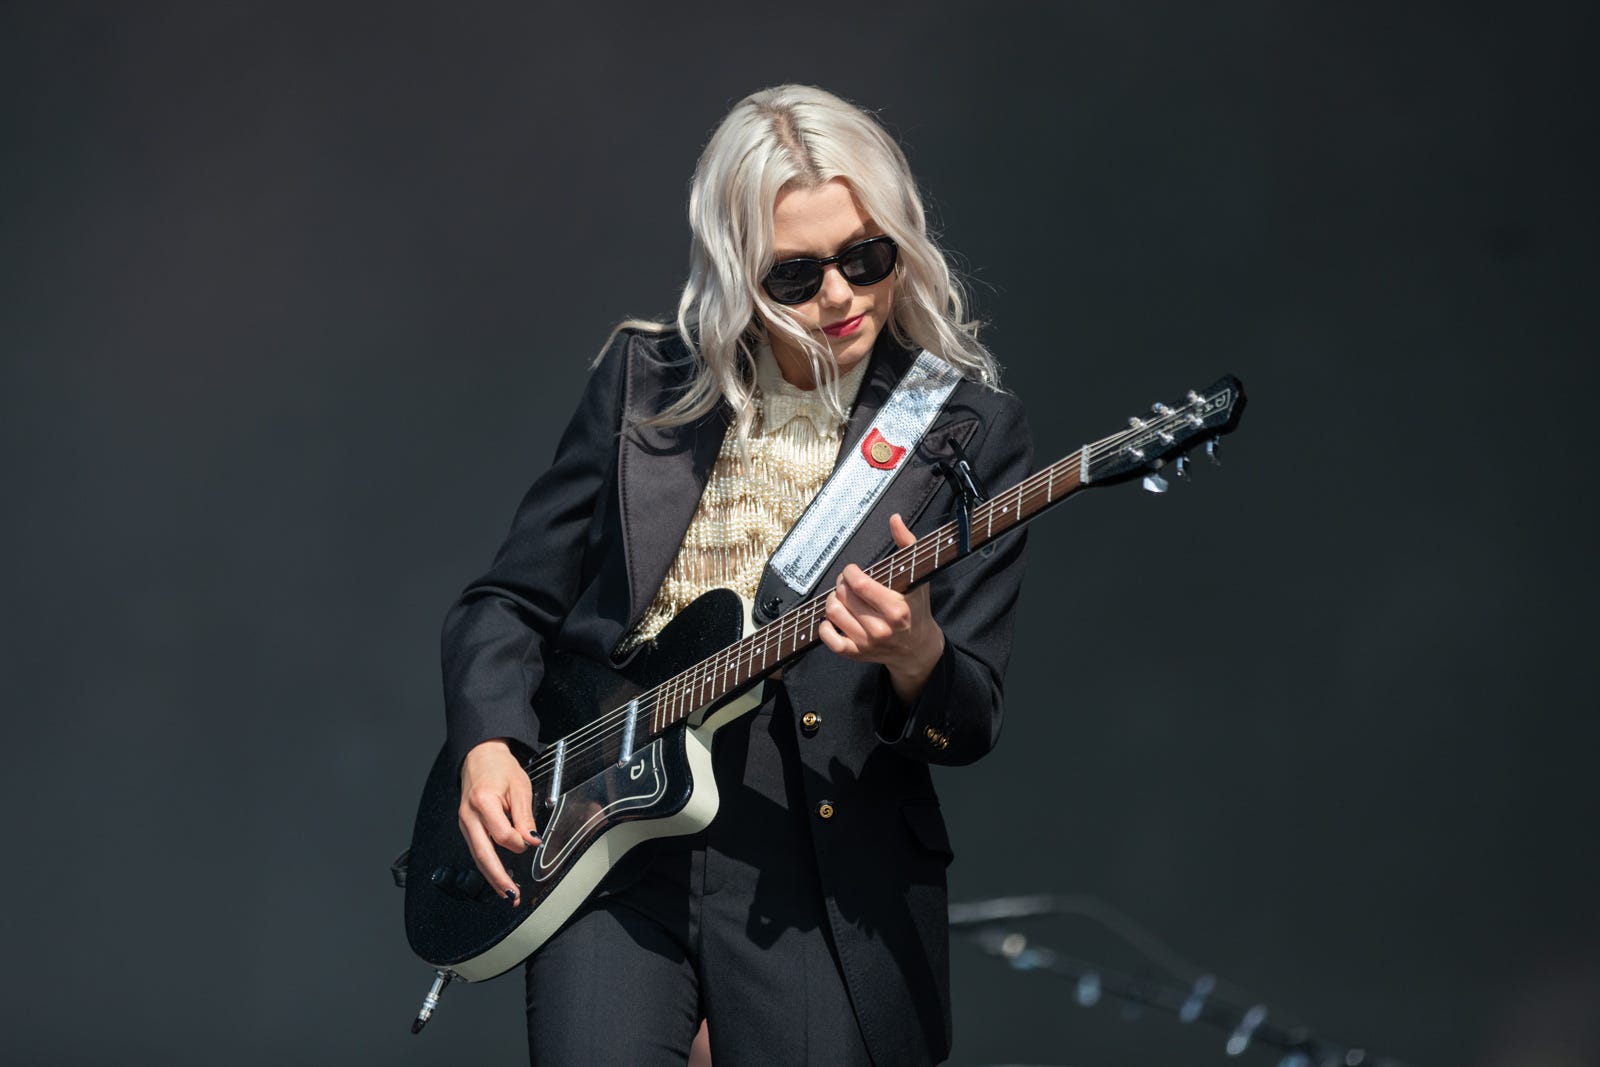 Phoebe Bridgers performs at the Austin City Limits Music Festival on Oct. 2.